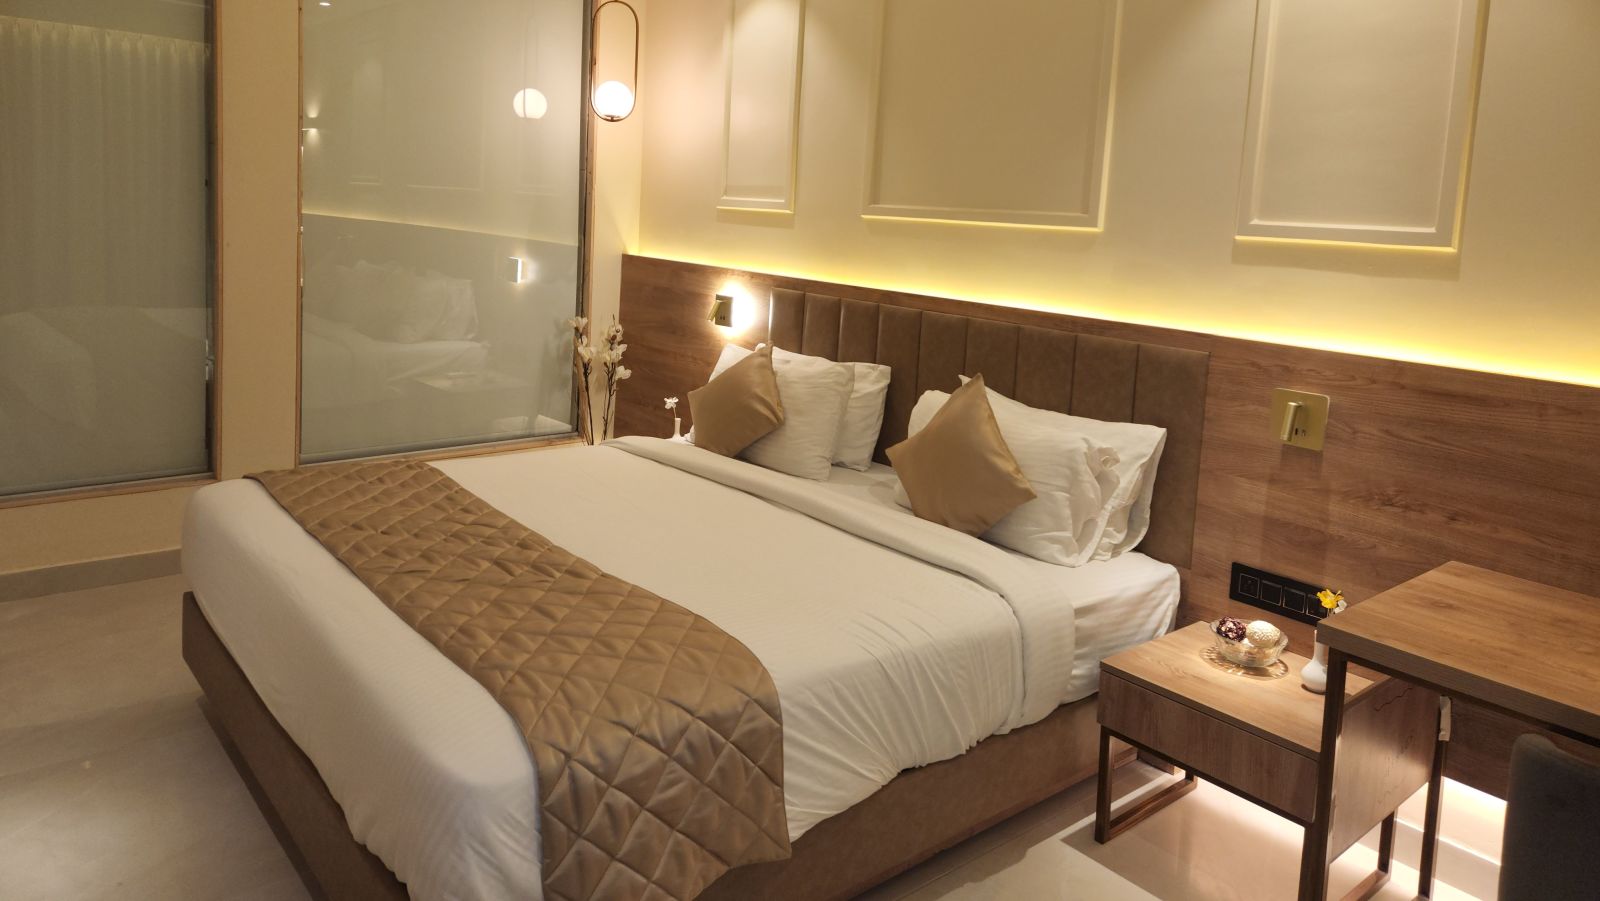 Arabica Suite with a double bed and side tables